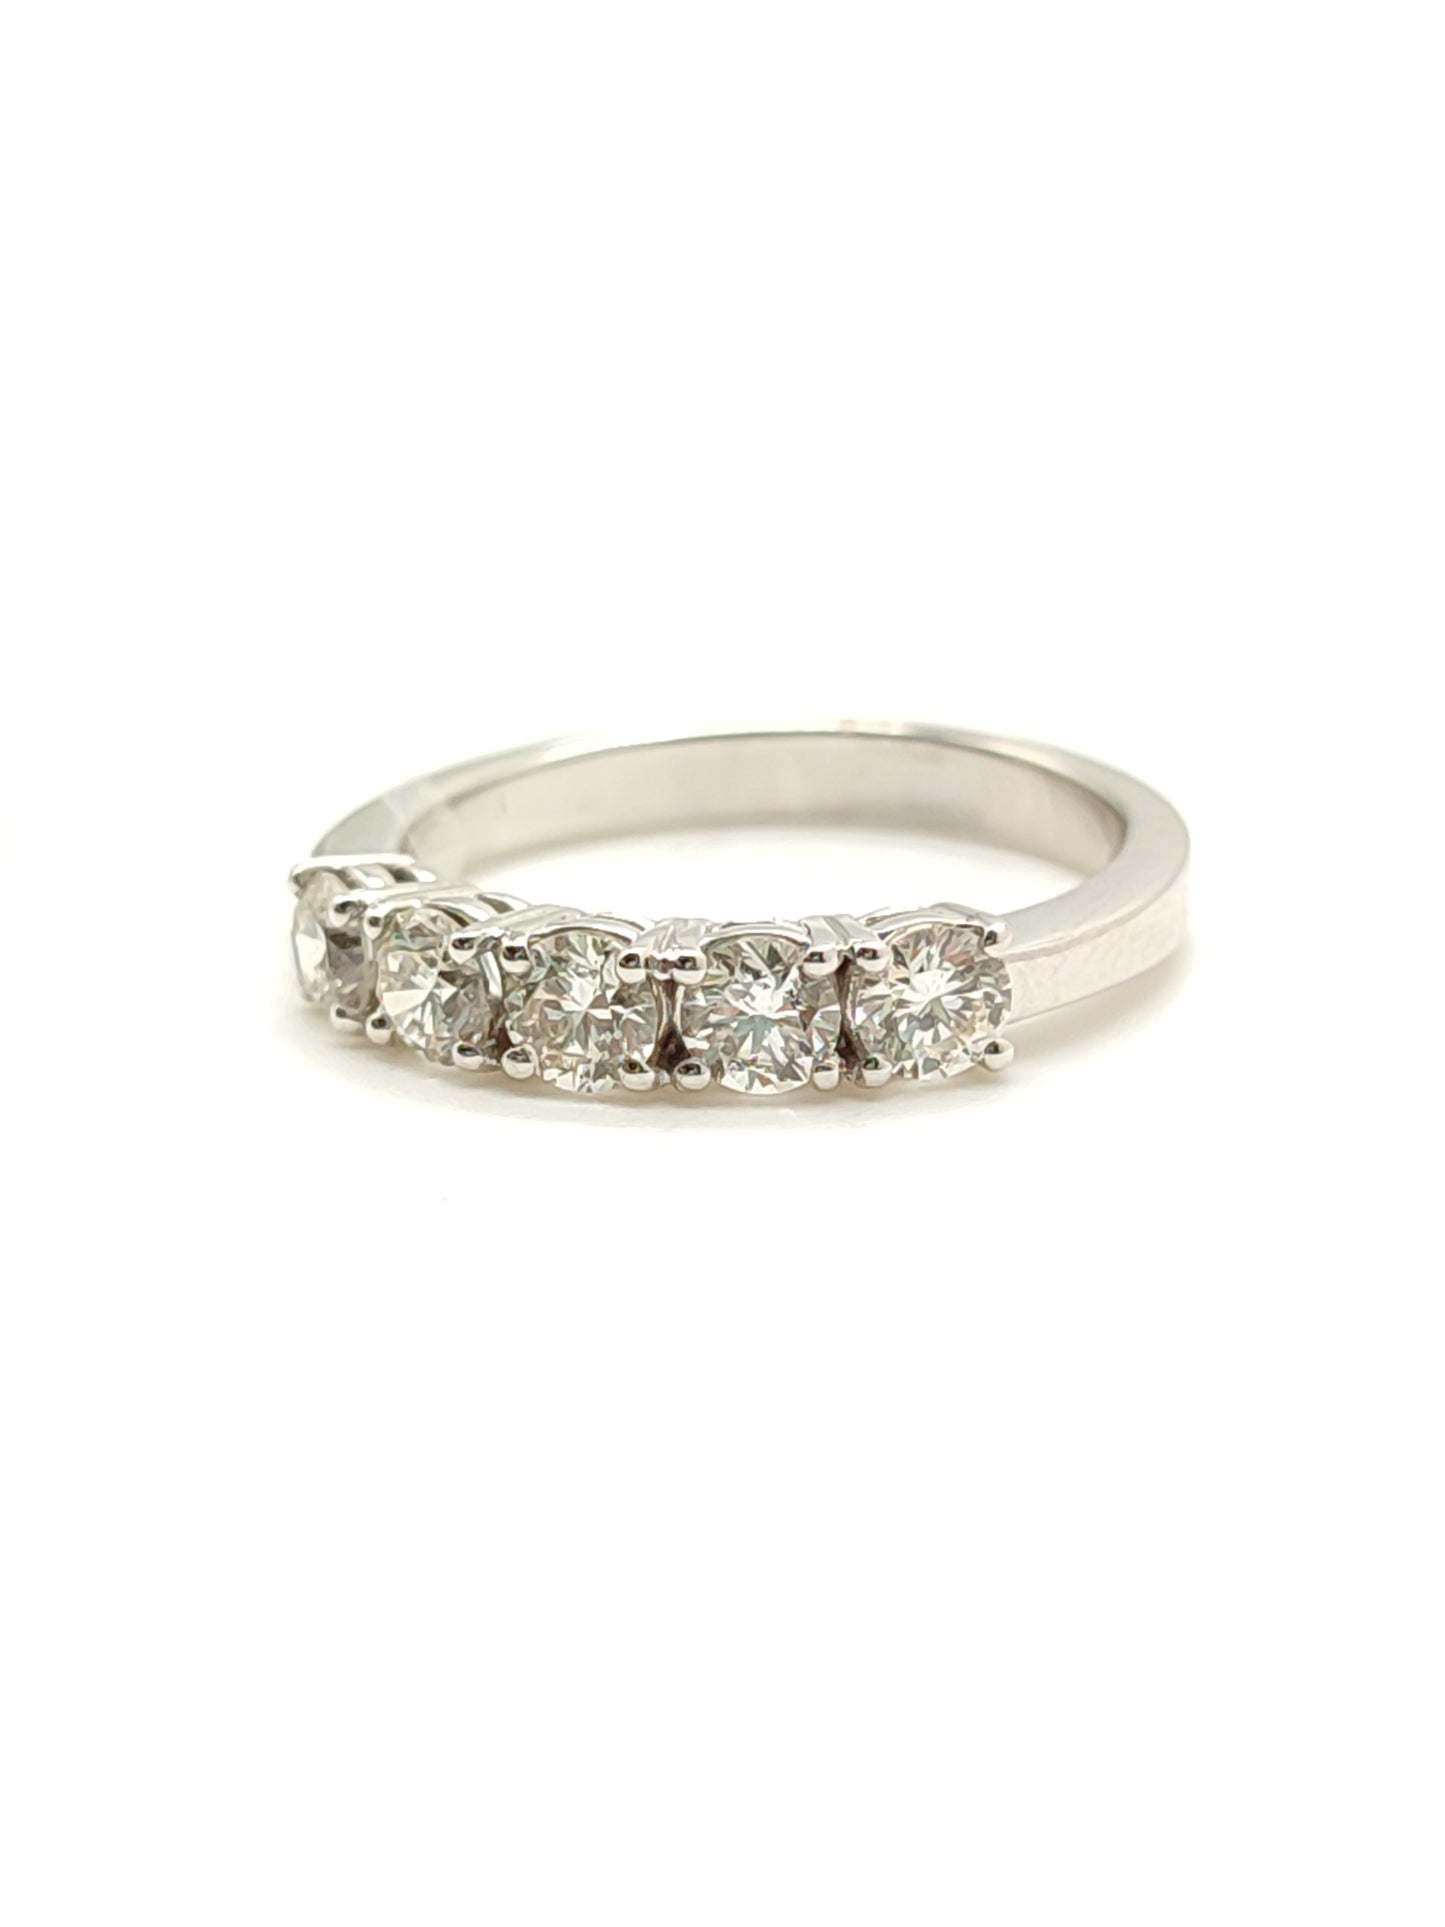 Half wedding band ring in gold with 1.00ct diamonds